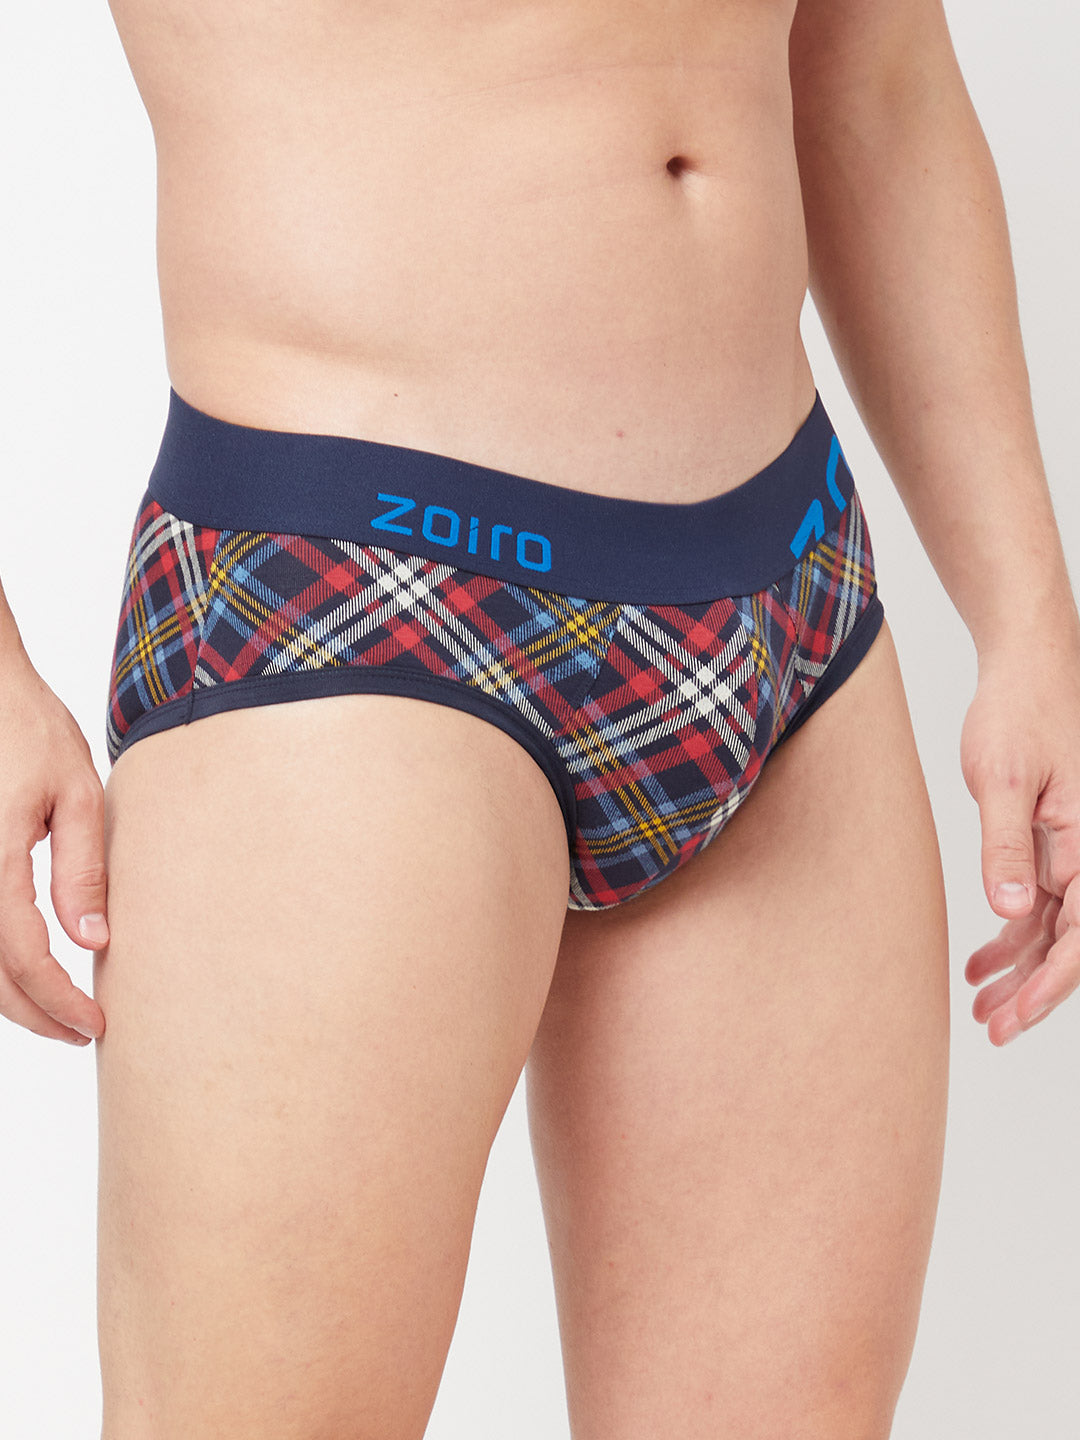 Zoiro Men&#39;s Cotton Printed Brief (Pack 2)- Total Eclipse + Red